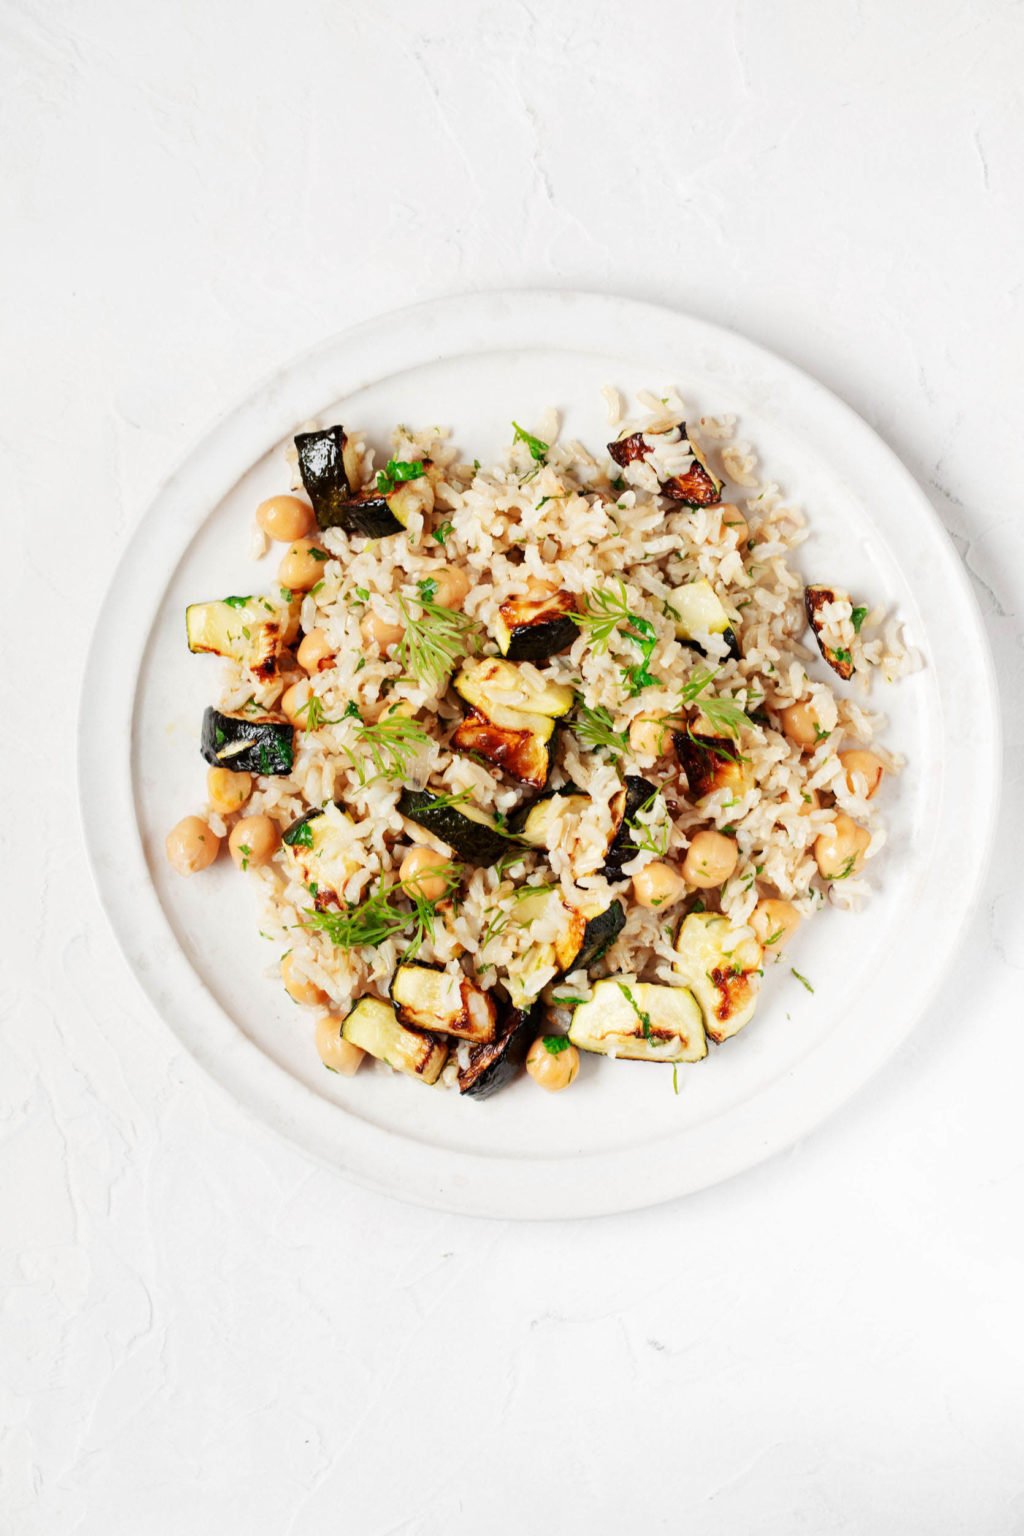 A white, round plate serves a zucchini, rice, and chickpea dish. It rests on a white surface.